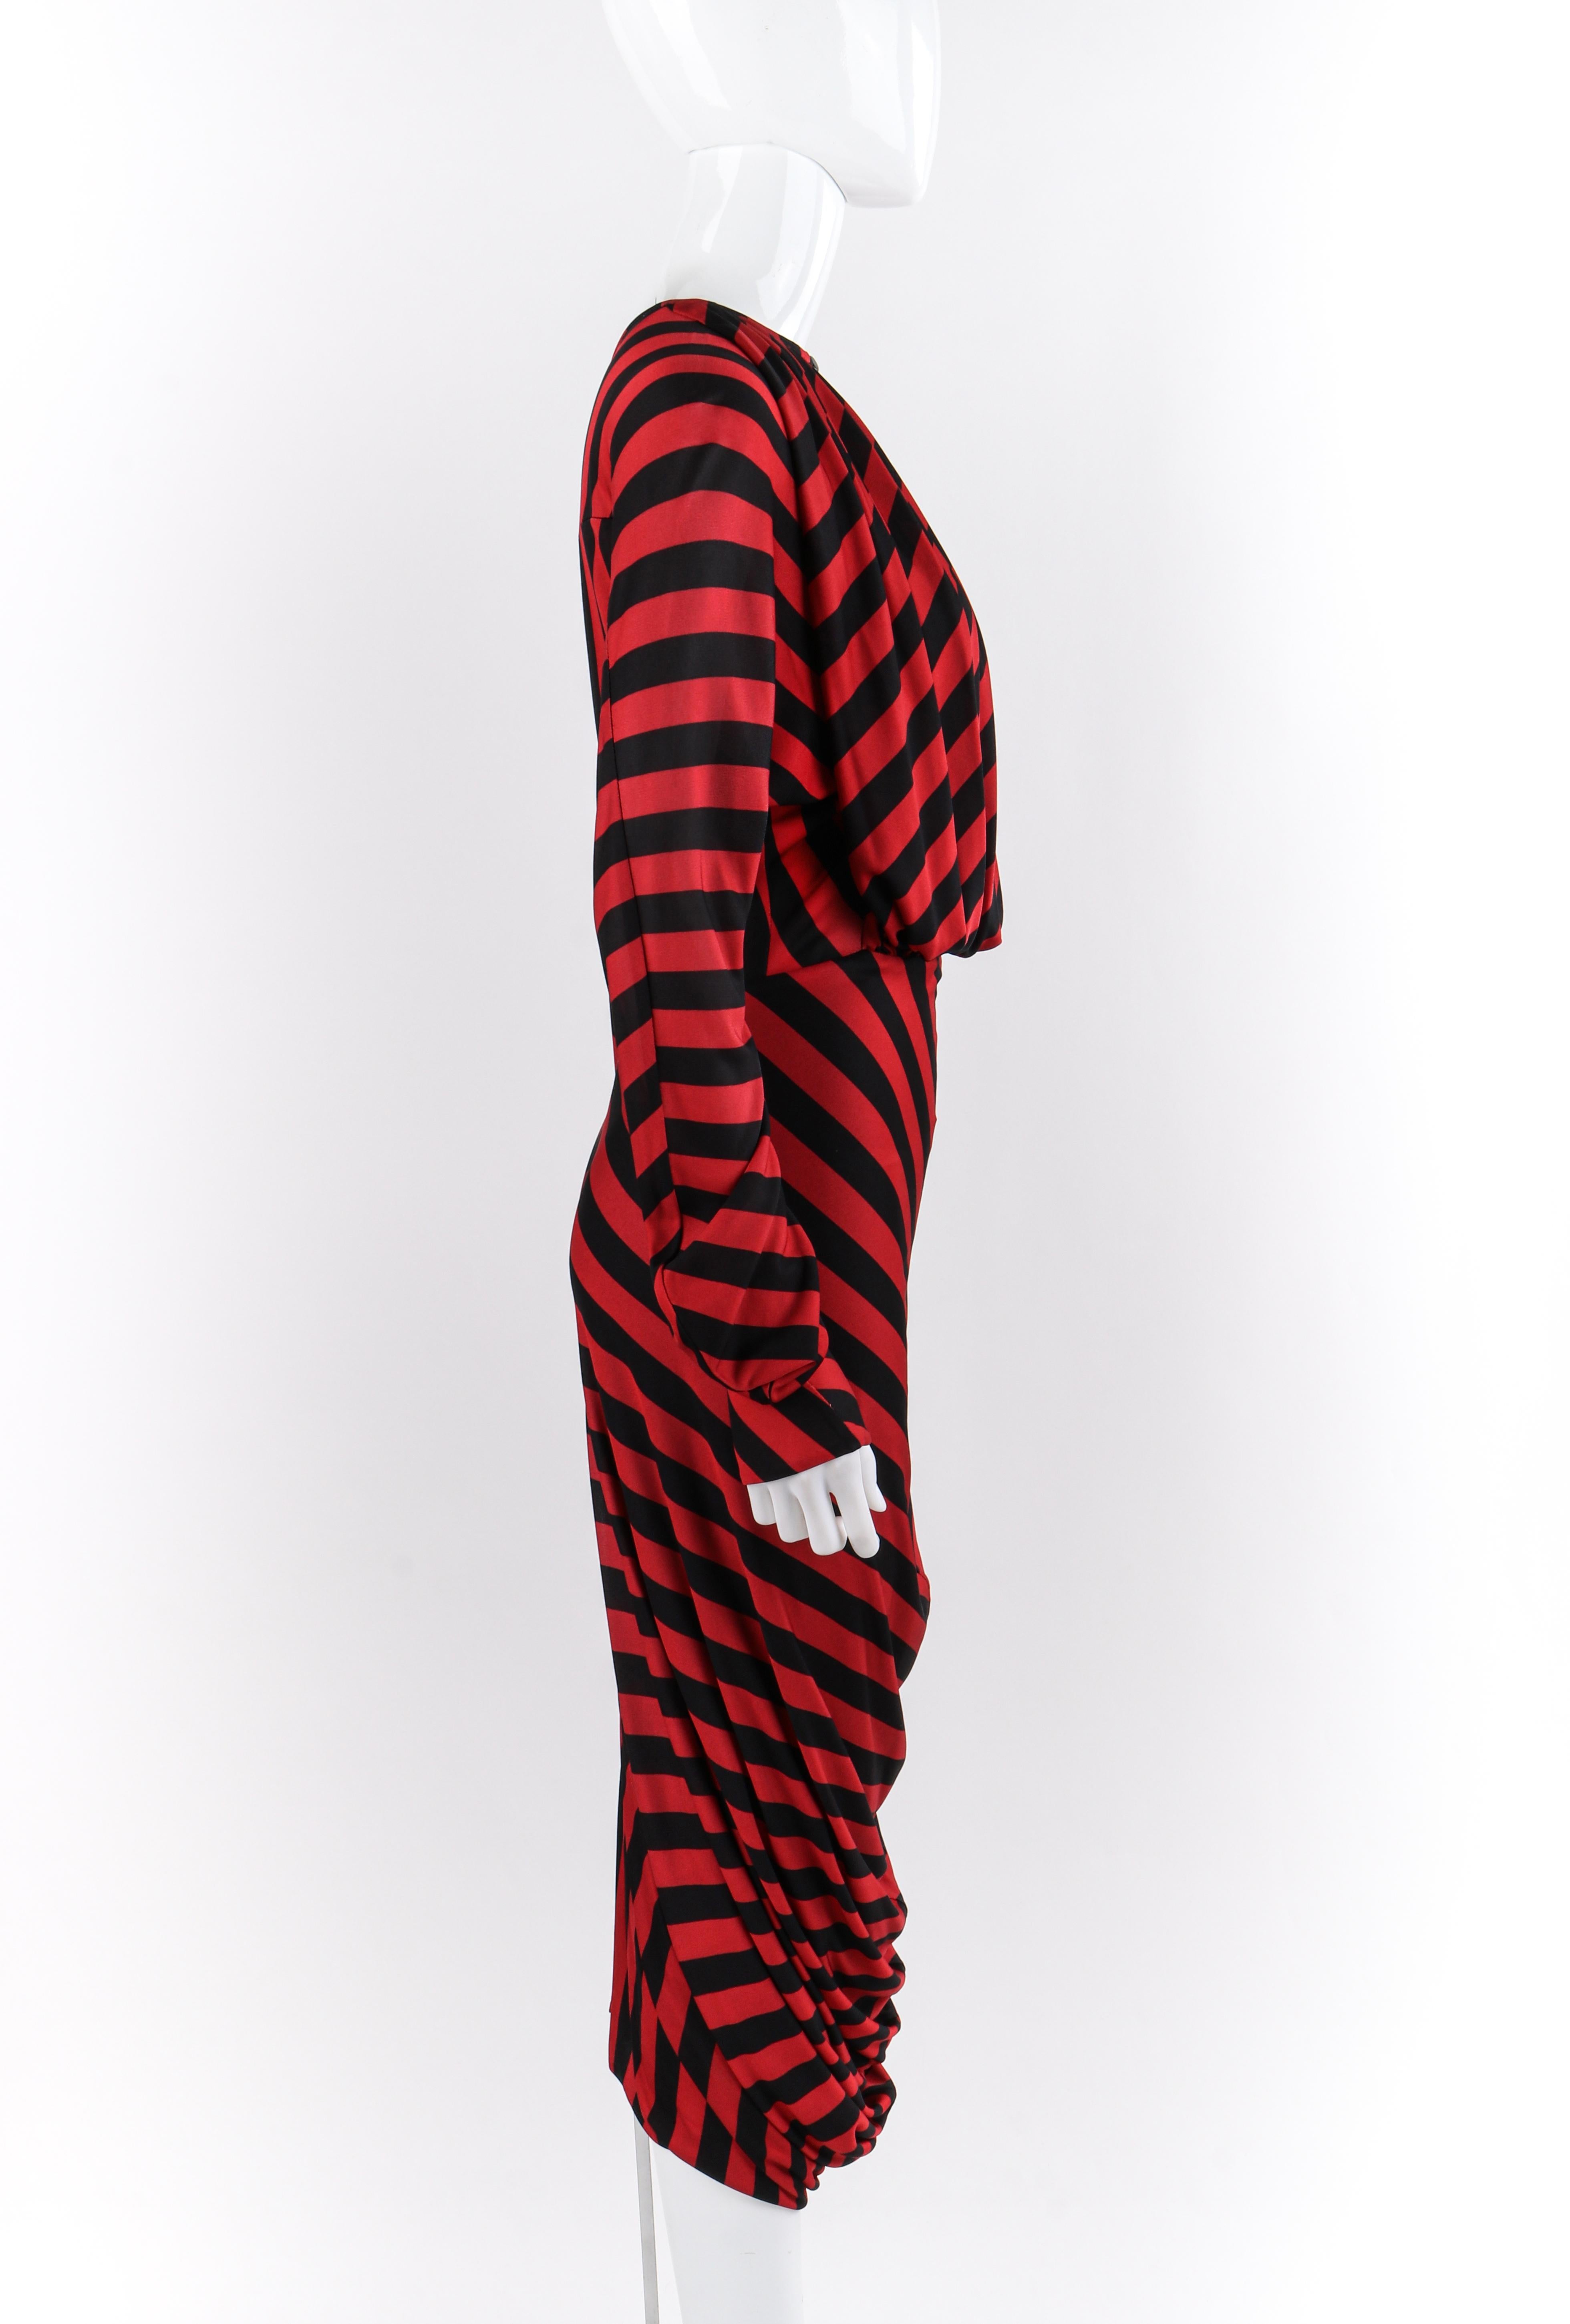 ALEXANDER McQUEEN F/W 2009 “The Horn of Plenty” Red Black Chevron Ruched Dress In Good Condition For Sale In Thiensville, WI